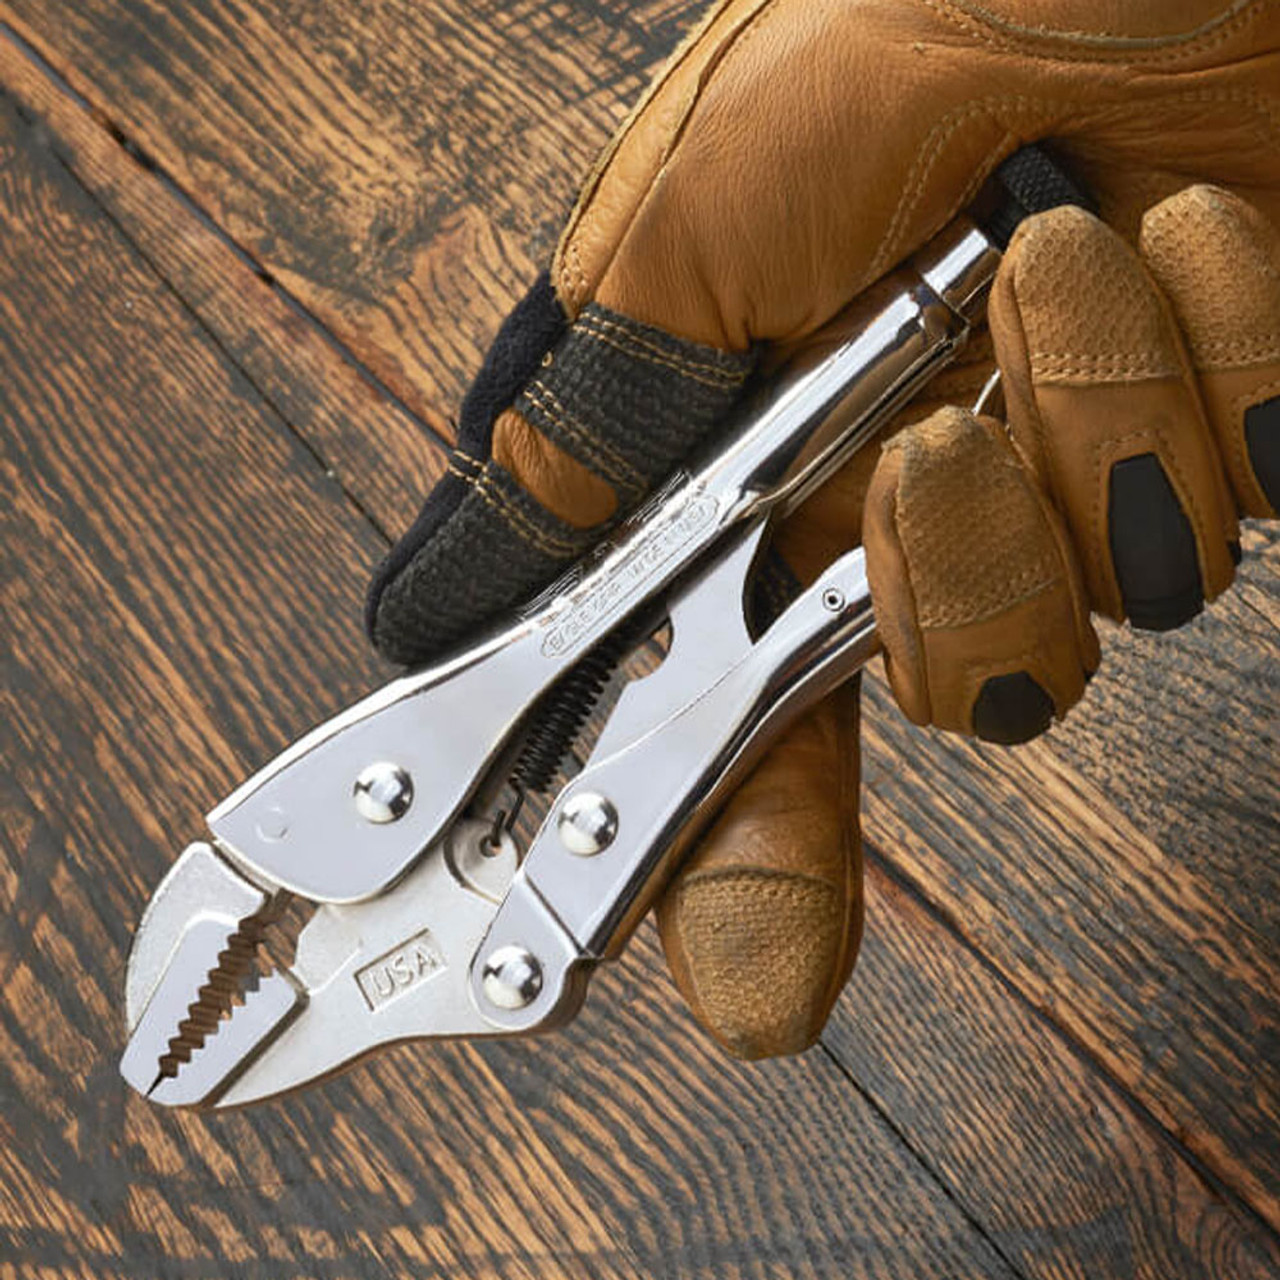 Malco Products SBC - Proudly made in the USA 🇺🇲 Our Eagle Grip® locking  pliers are the strongest locking pliers* on the market. Try a pair for  yourself and experience the difference